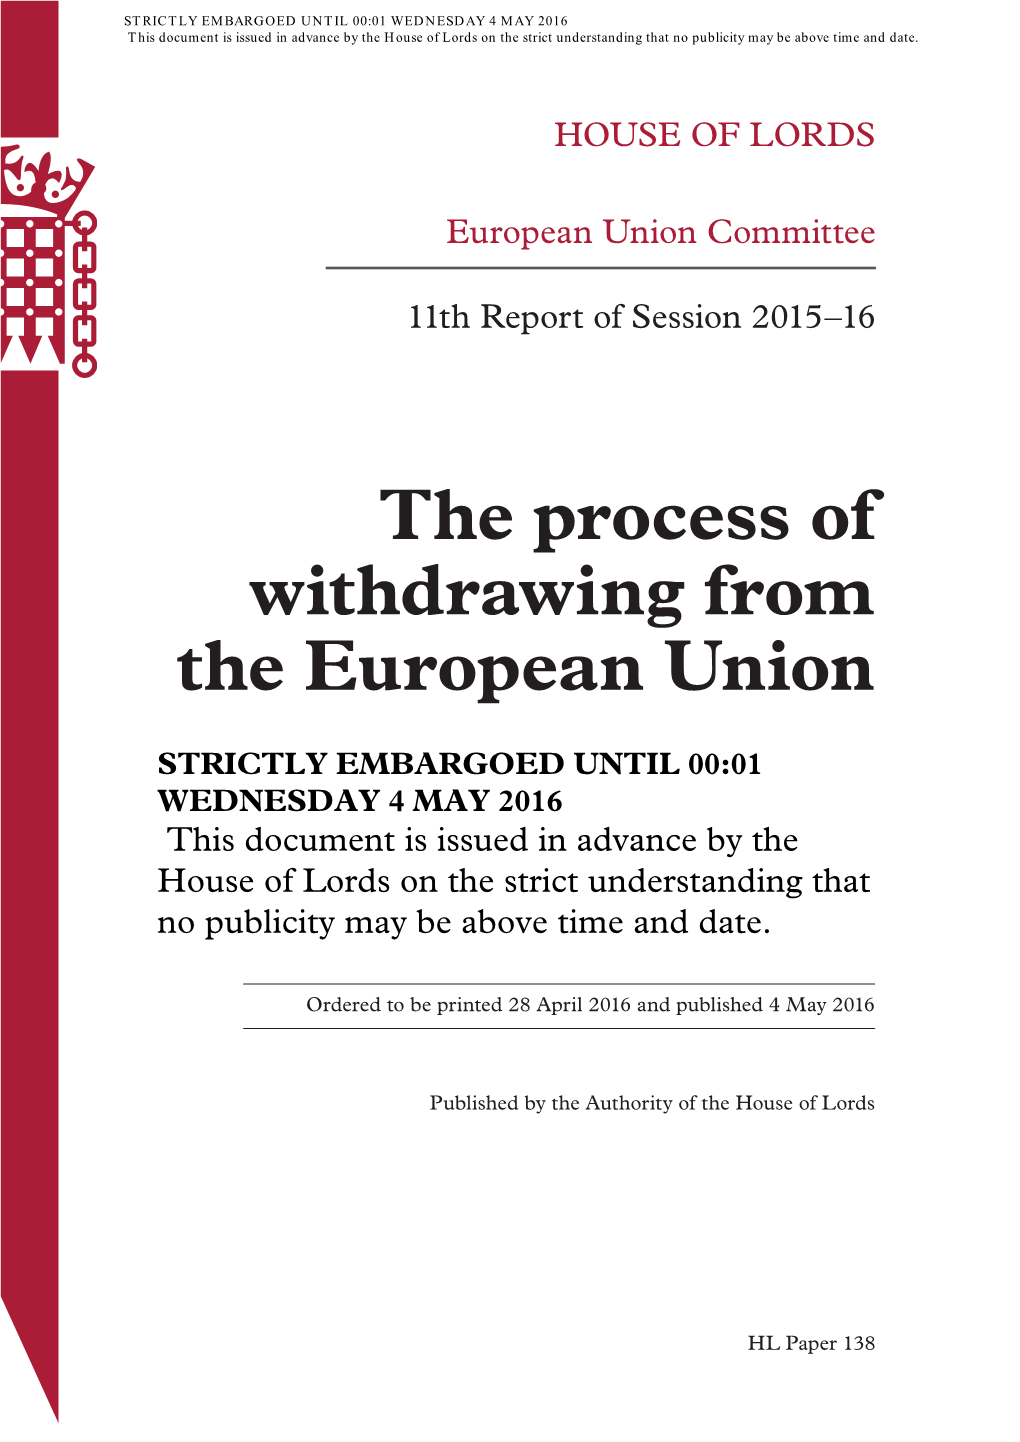 The Process of Withdrawing from the European Union